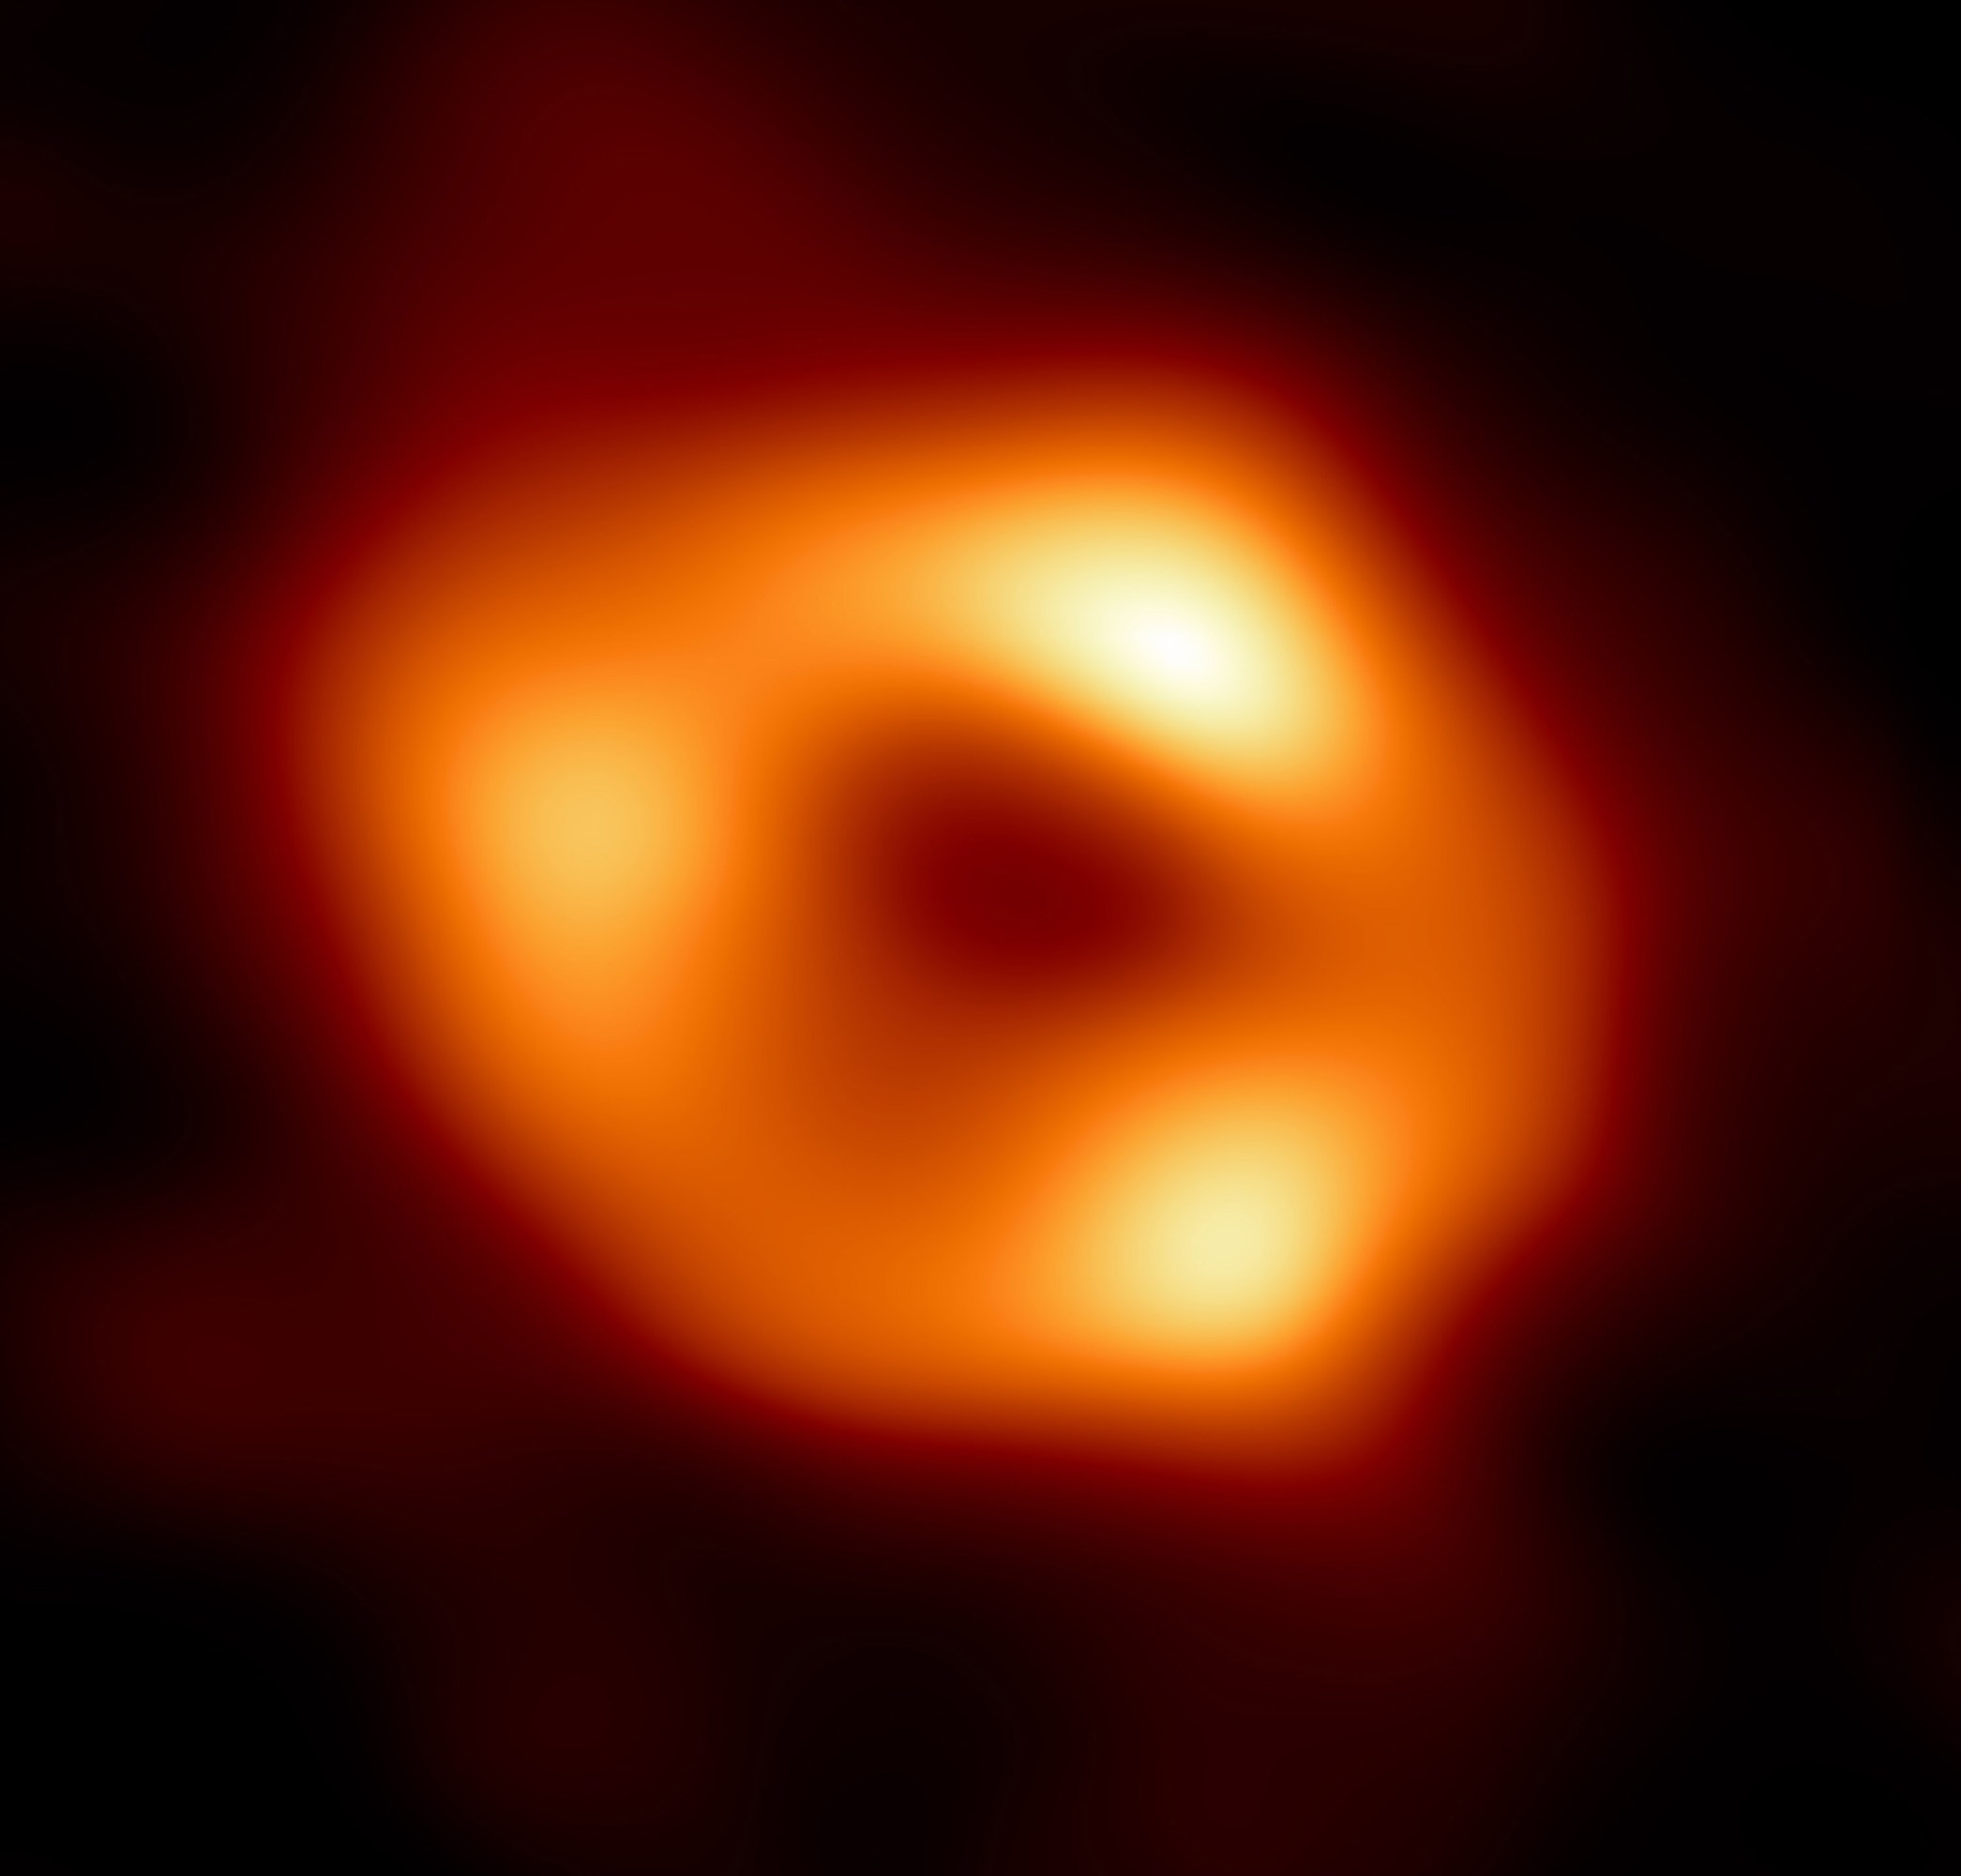 Supermassive black hole in the center of the galaxy